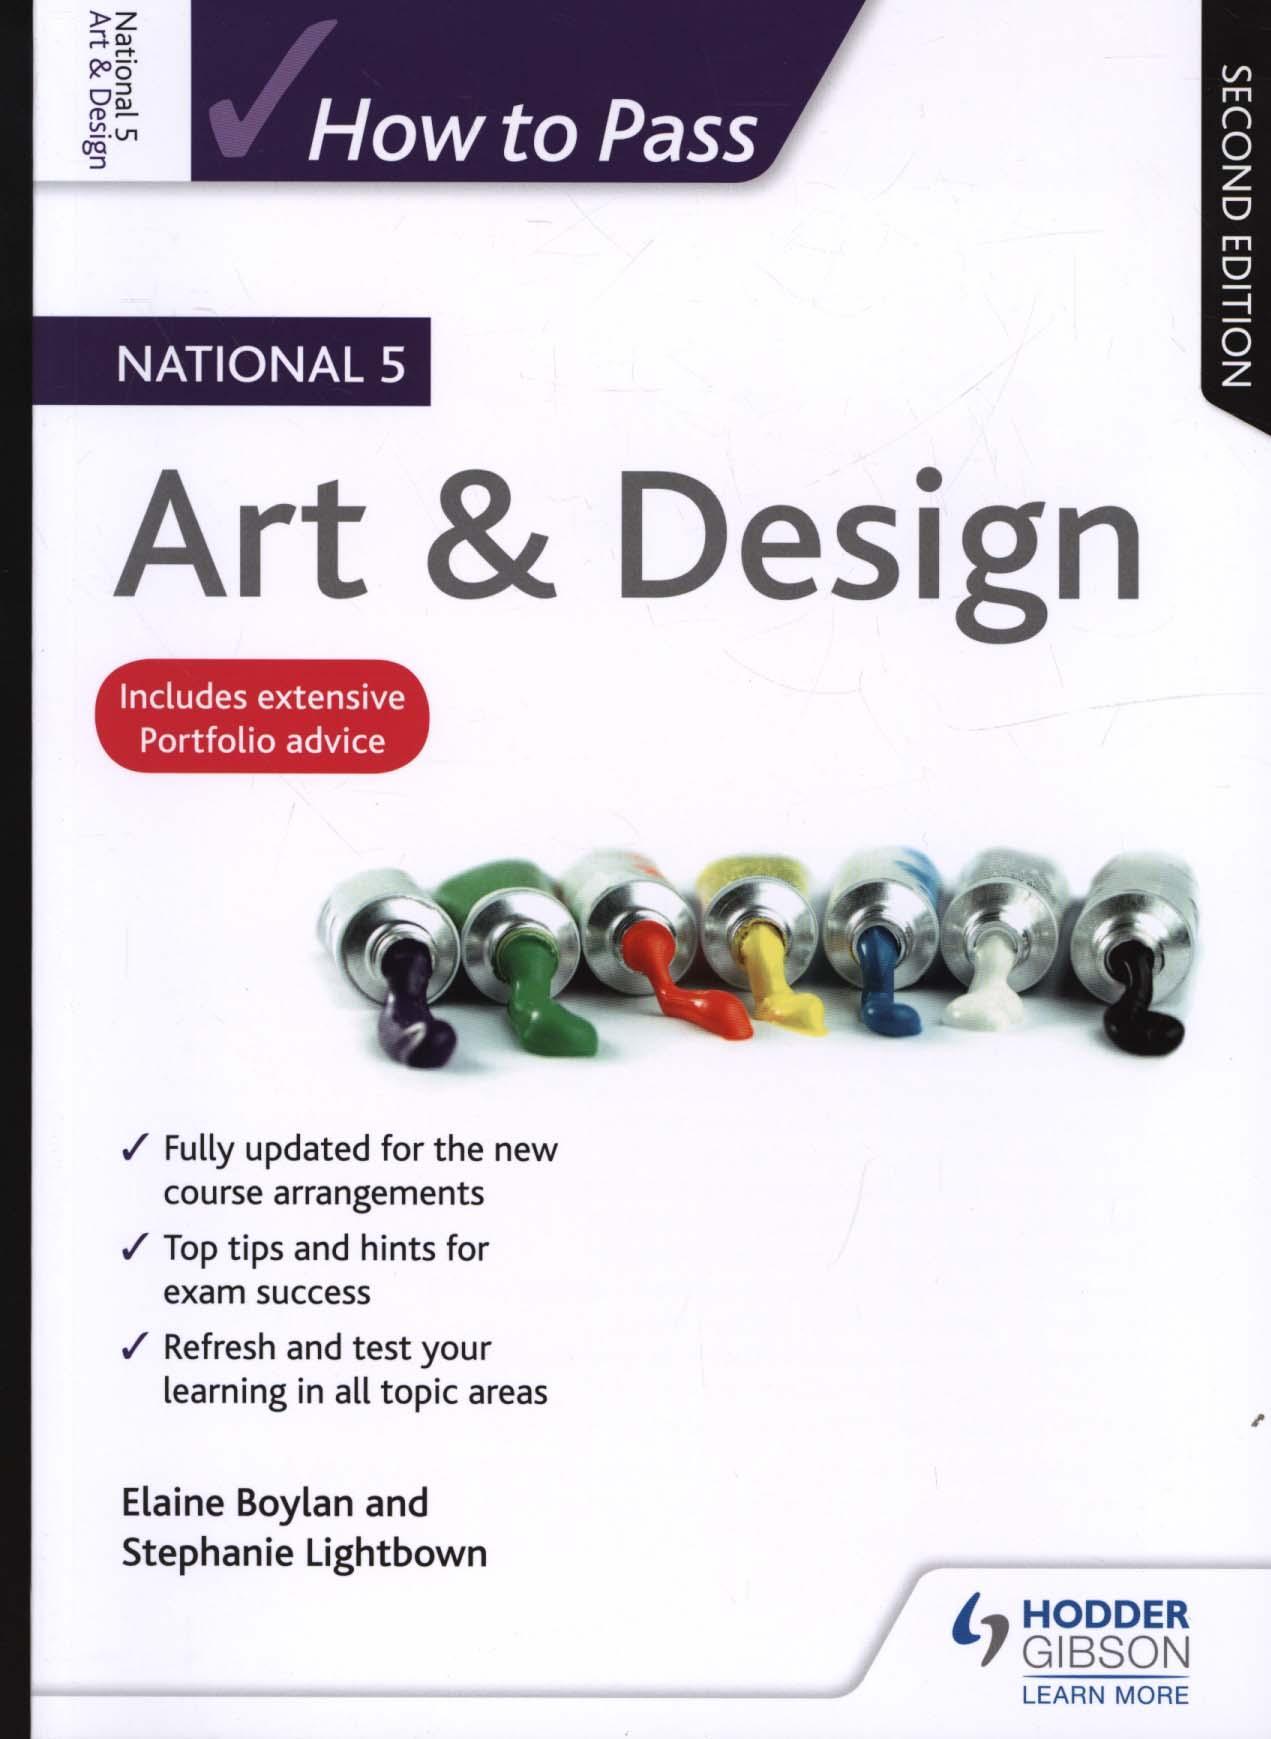 How to Pass National 5 Art & Design: Second Edition